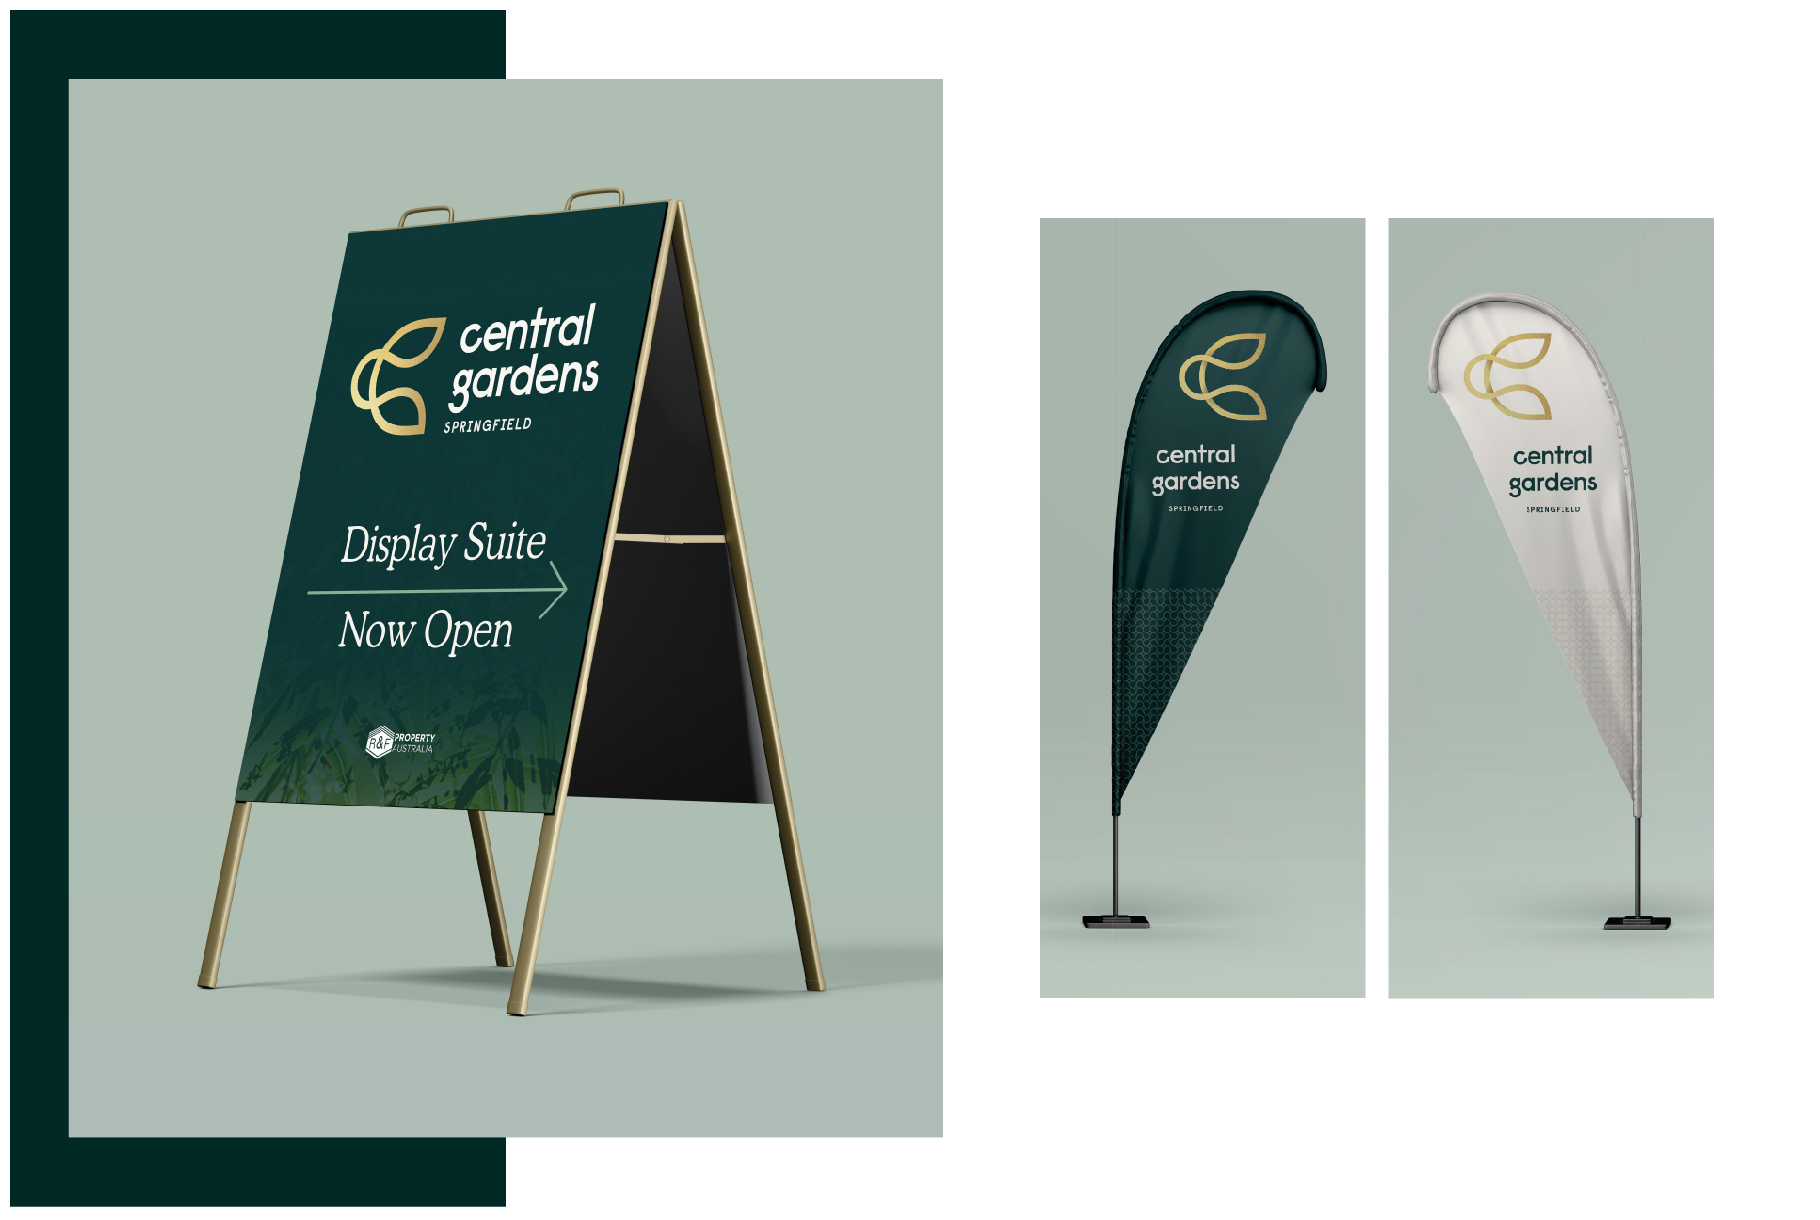 Central Gardens branded a-frame sign and flags